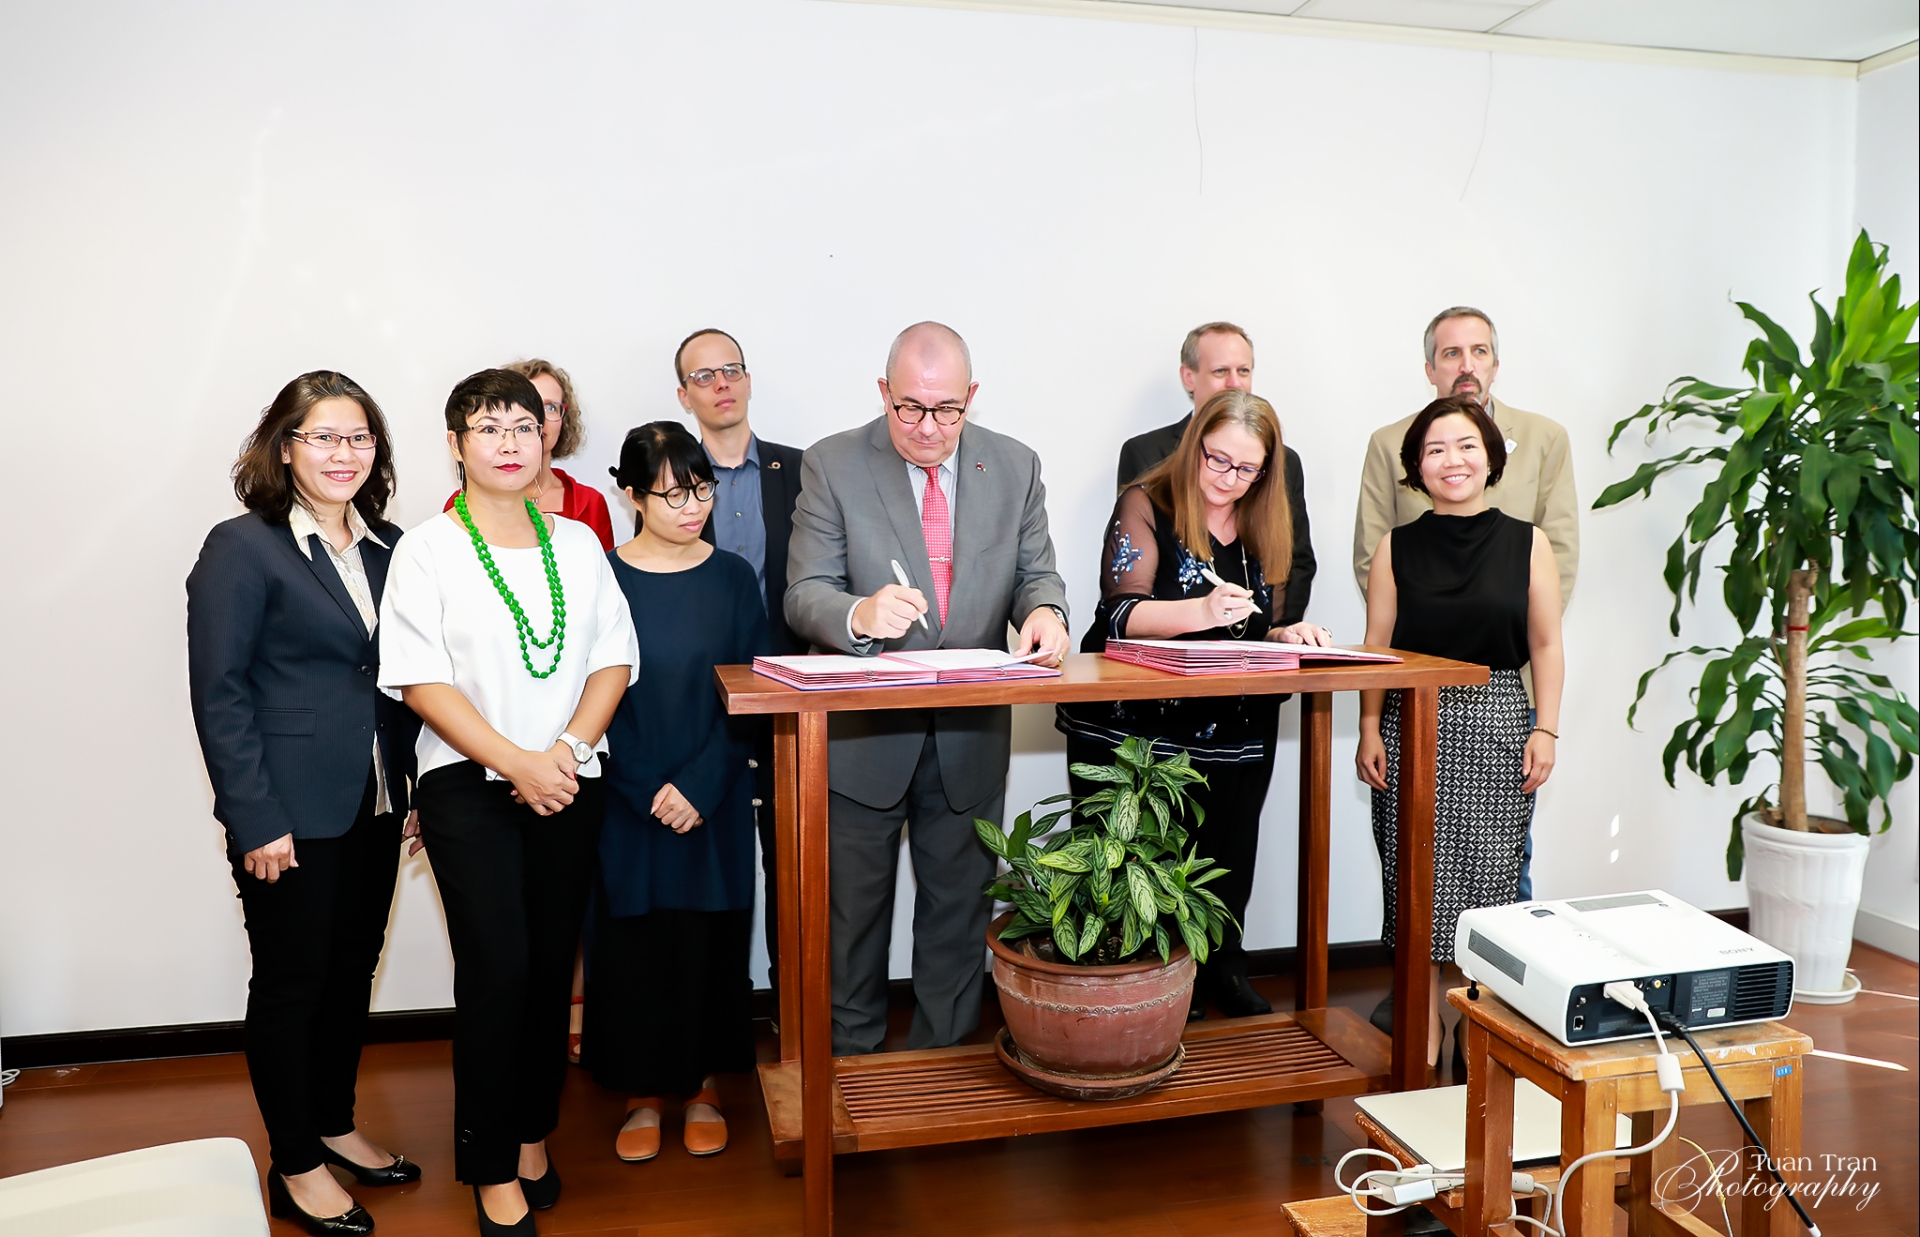 Non-government organisations sign charter on sustainable environment